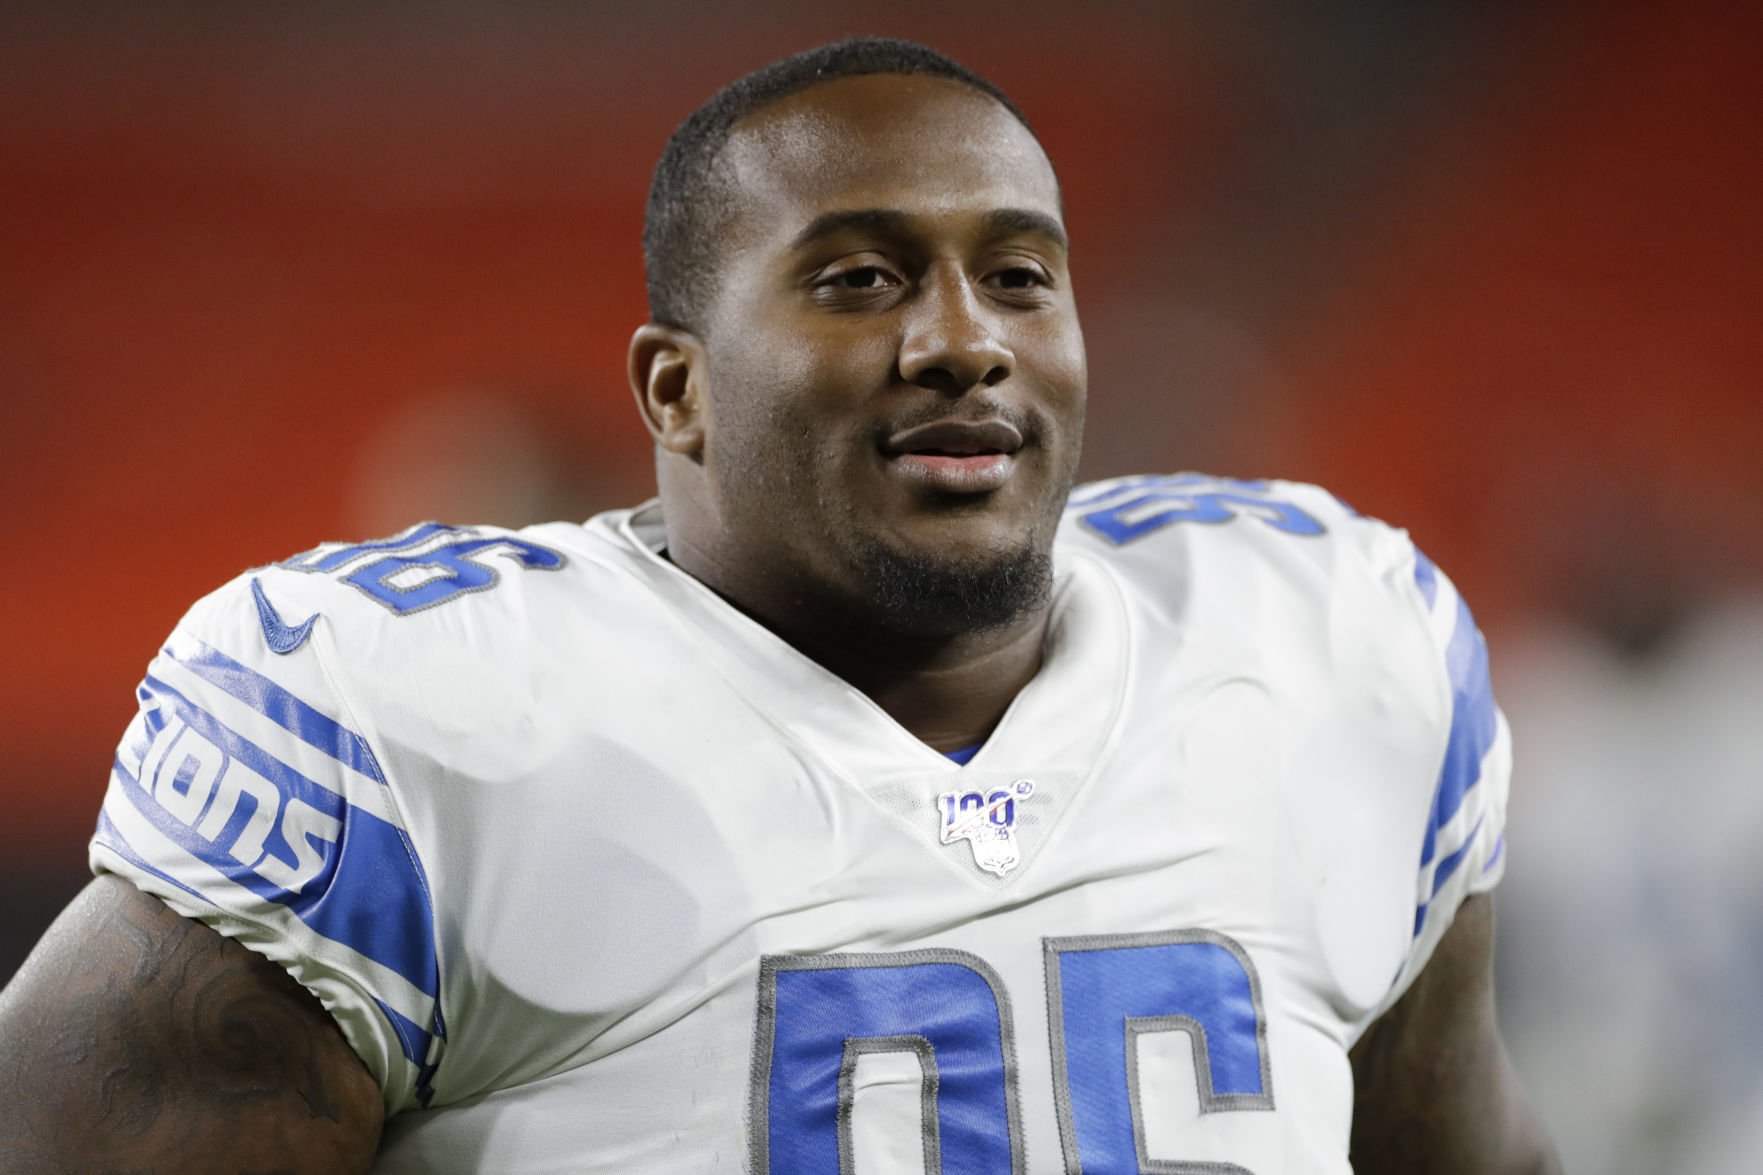 After 'humbling' year, Mike Daniels says he has 'so much more to ...